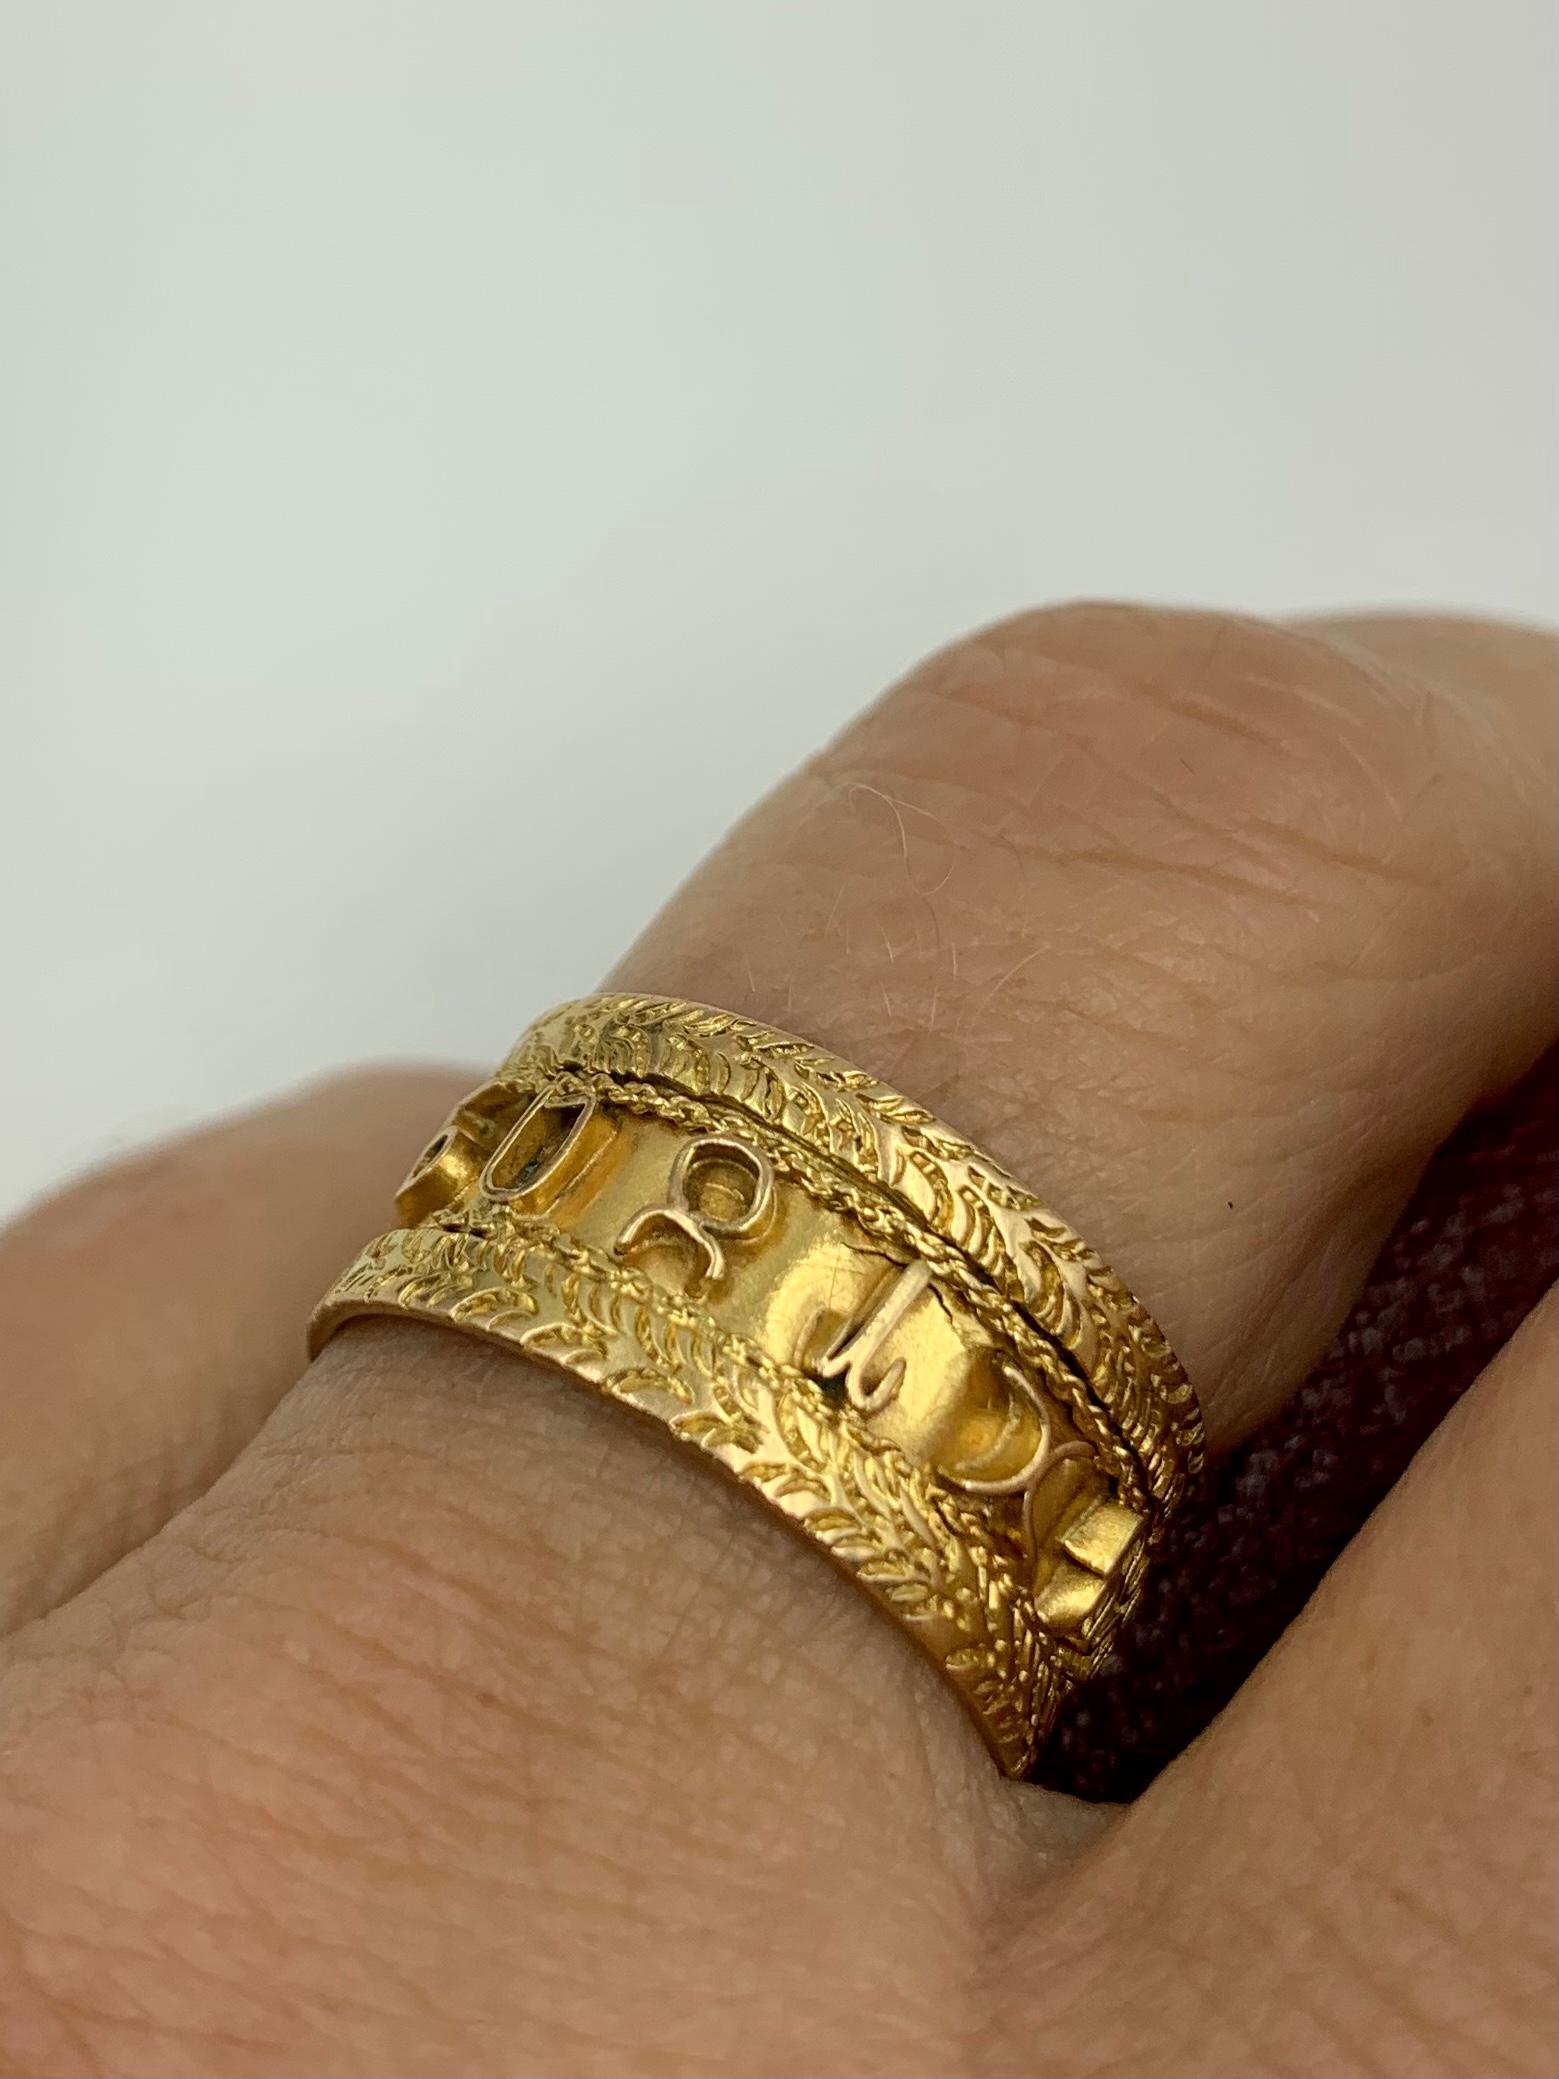 Striking wide 14K yellow gold band ring with the signs of the Zodiac symbols around the perimeter framed by attractive foliate borders. Astrological jewels have a universal appeal- most are designed as a single sign of the Zodiac. This interesting